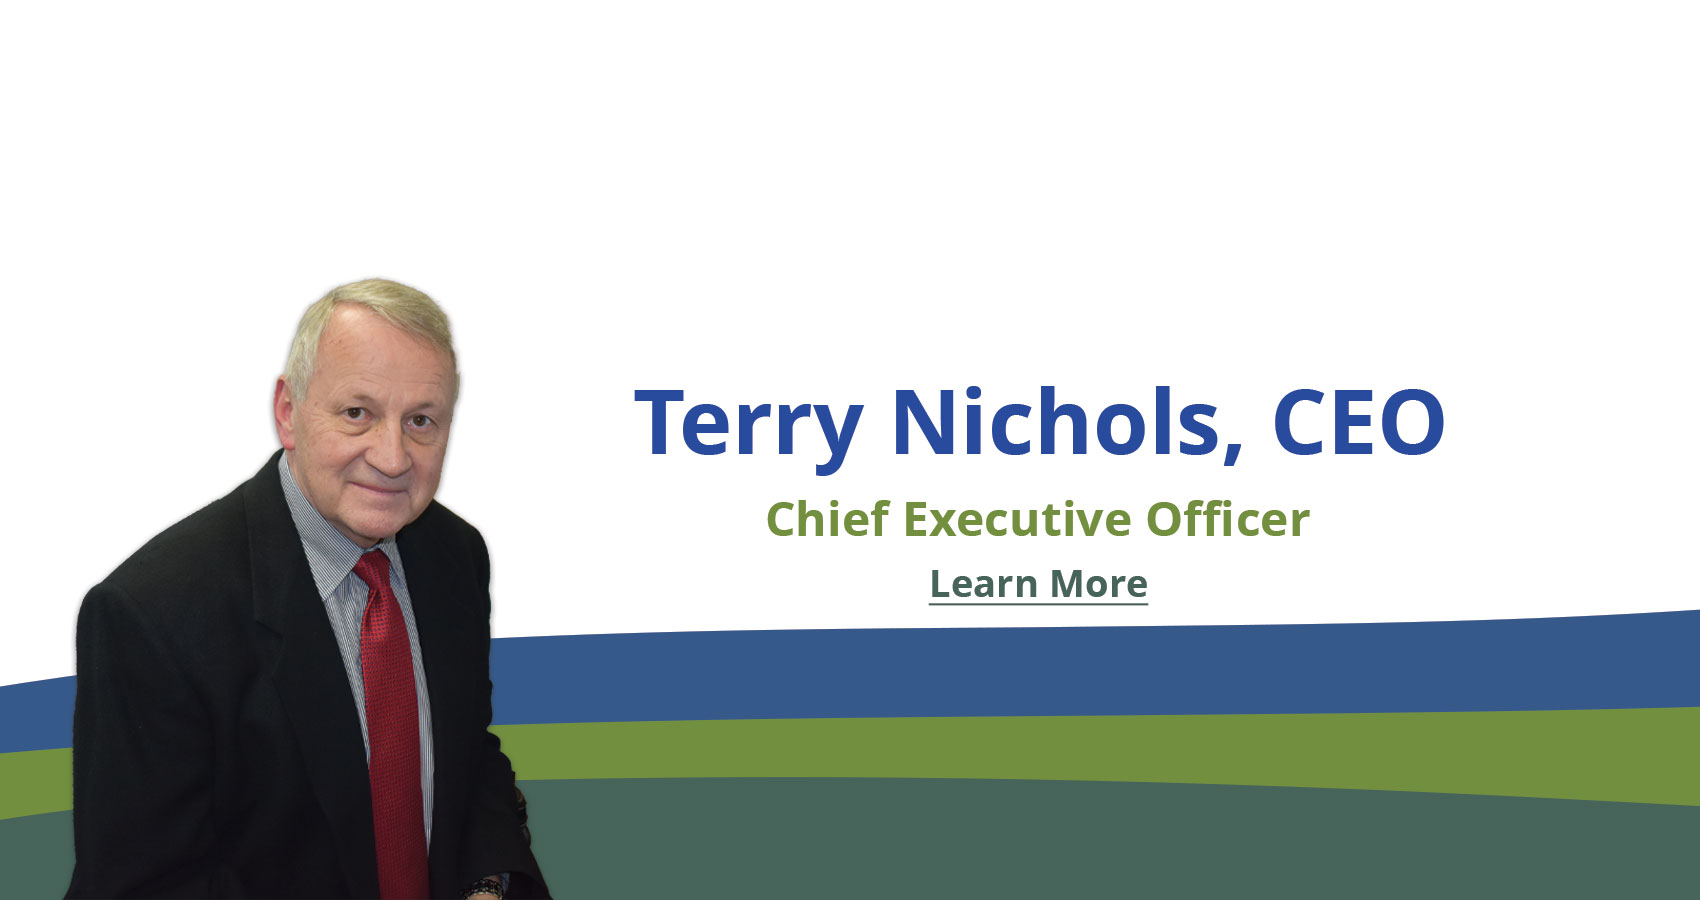 Banner picture of Terry Nichols, CEO, smiling. Banner says:

Welcome Terry Nichols, CEO
Chief Executive Officer
(Learn More)